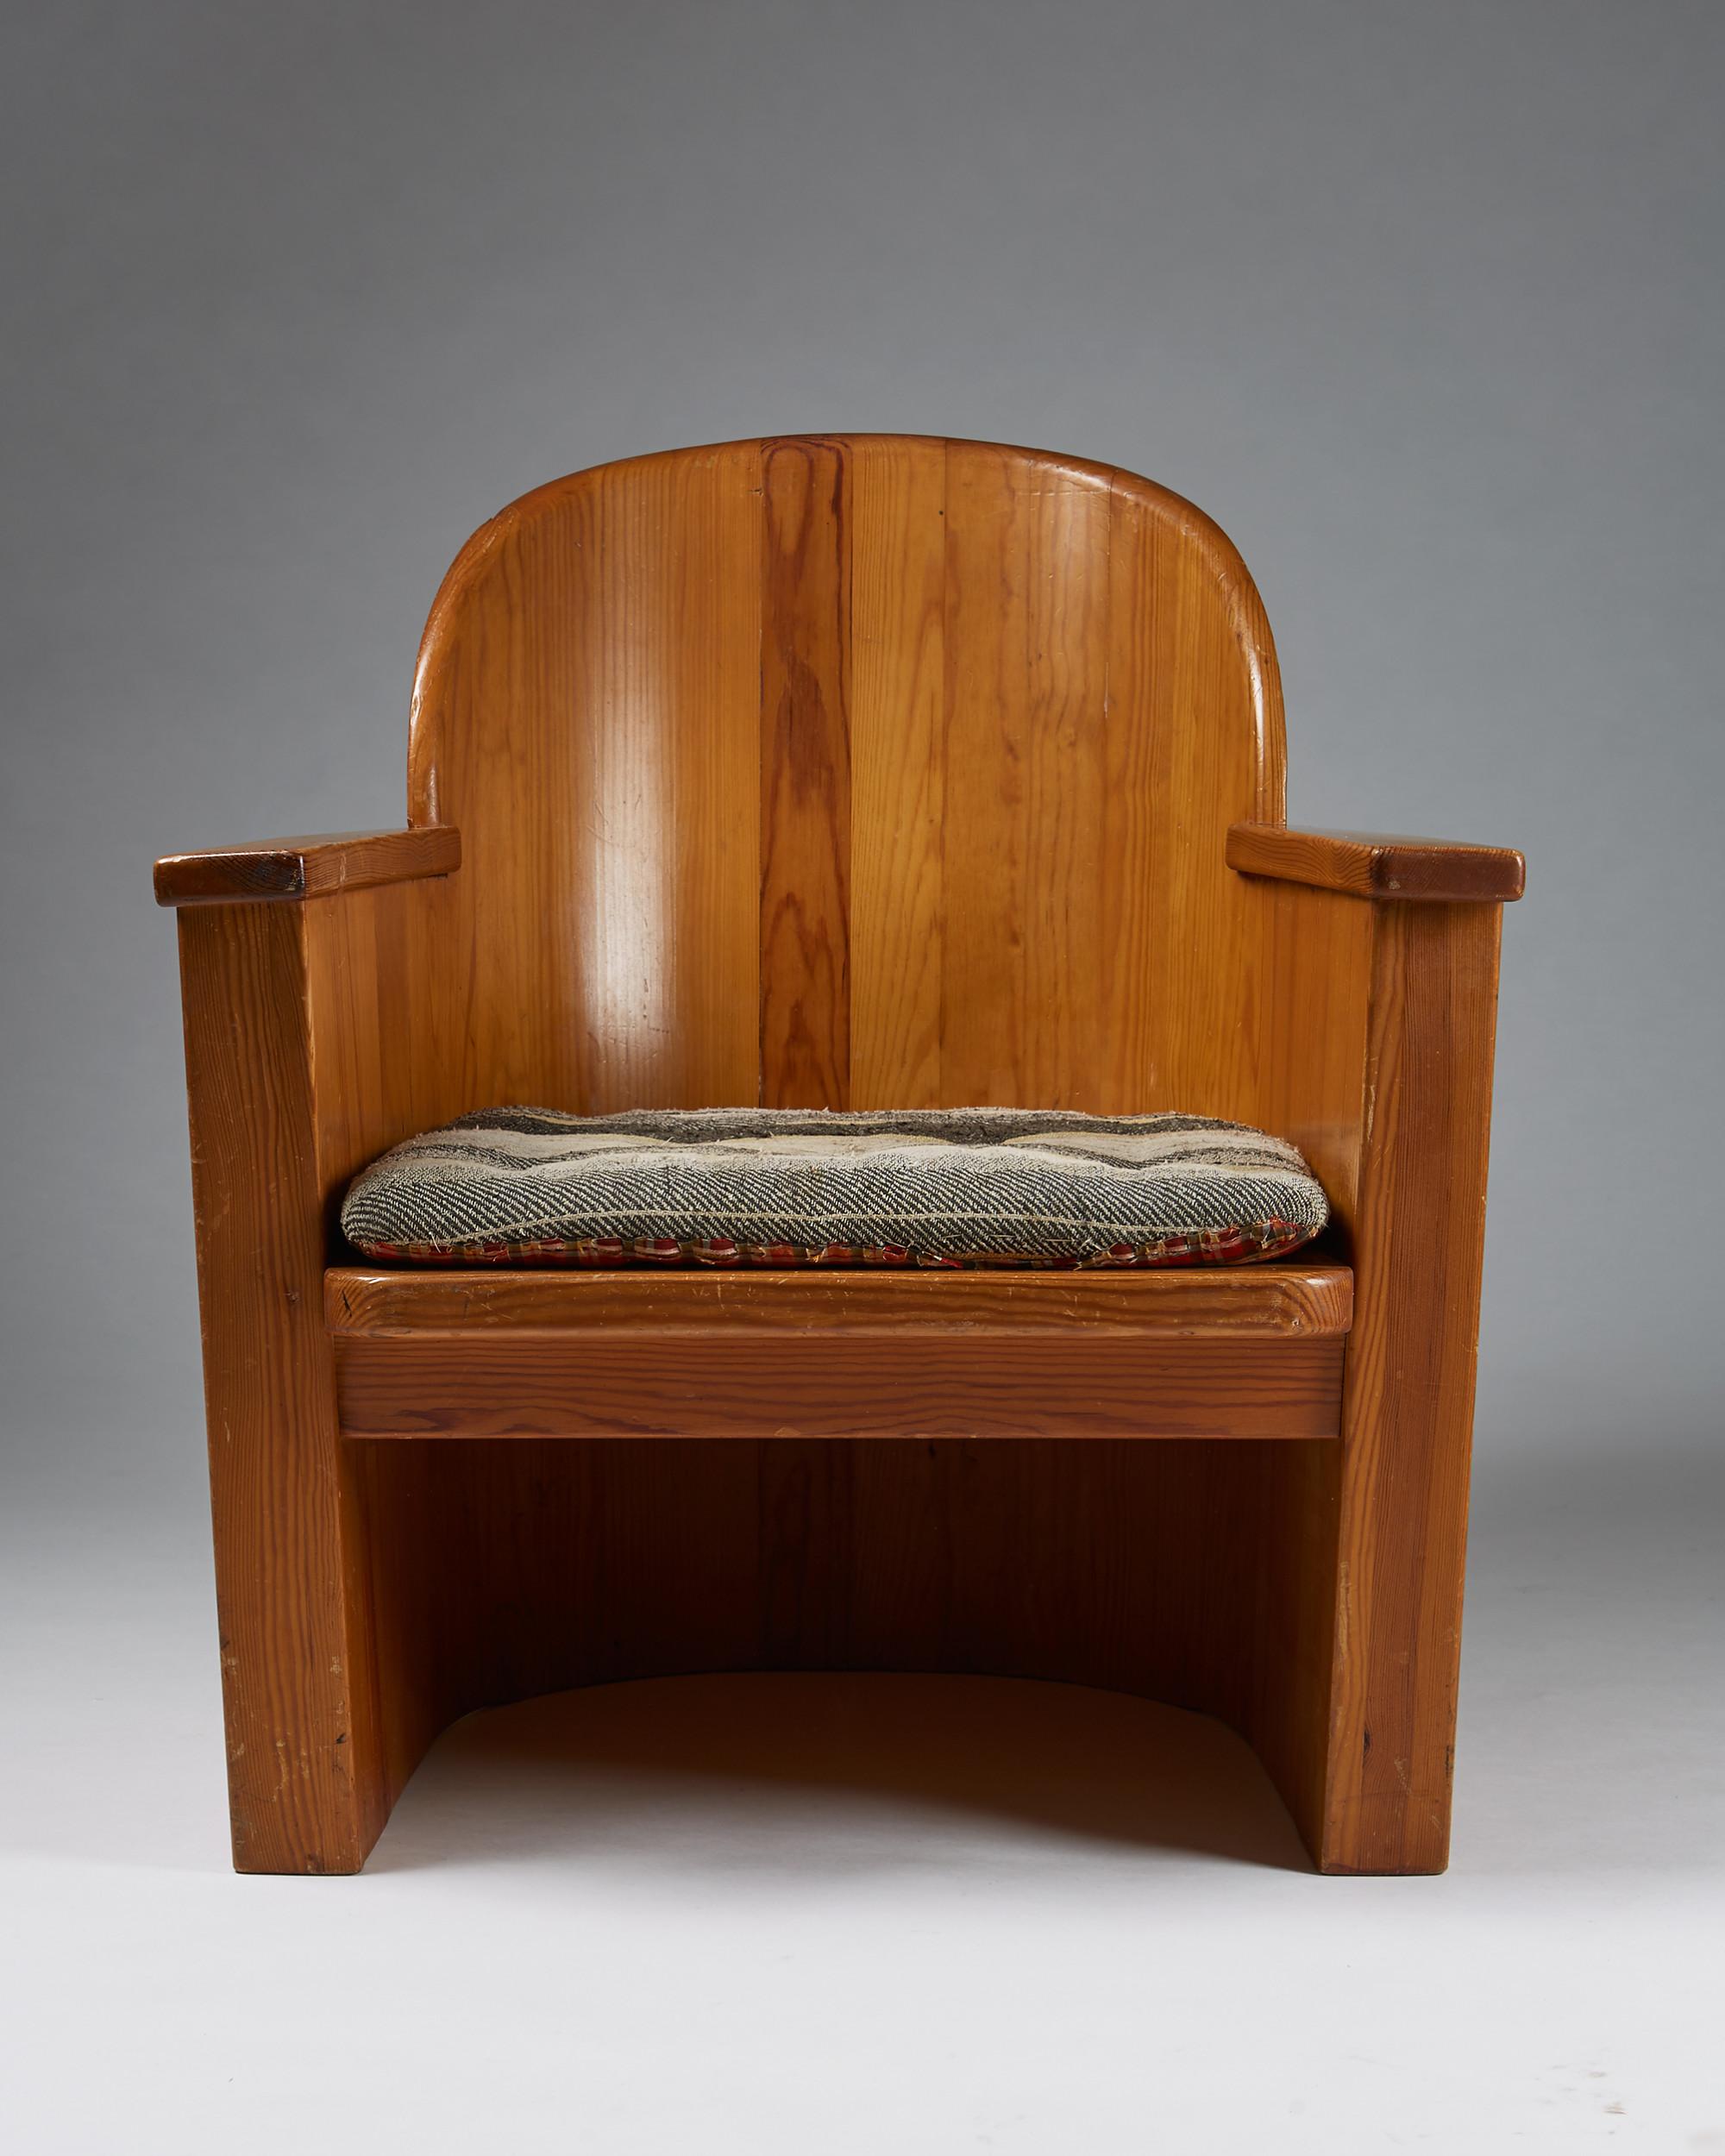 Scandinavian Modern Armchair Attributed to Axel-Einar Hjorth for Åby Furniture, Sweden, 1950s